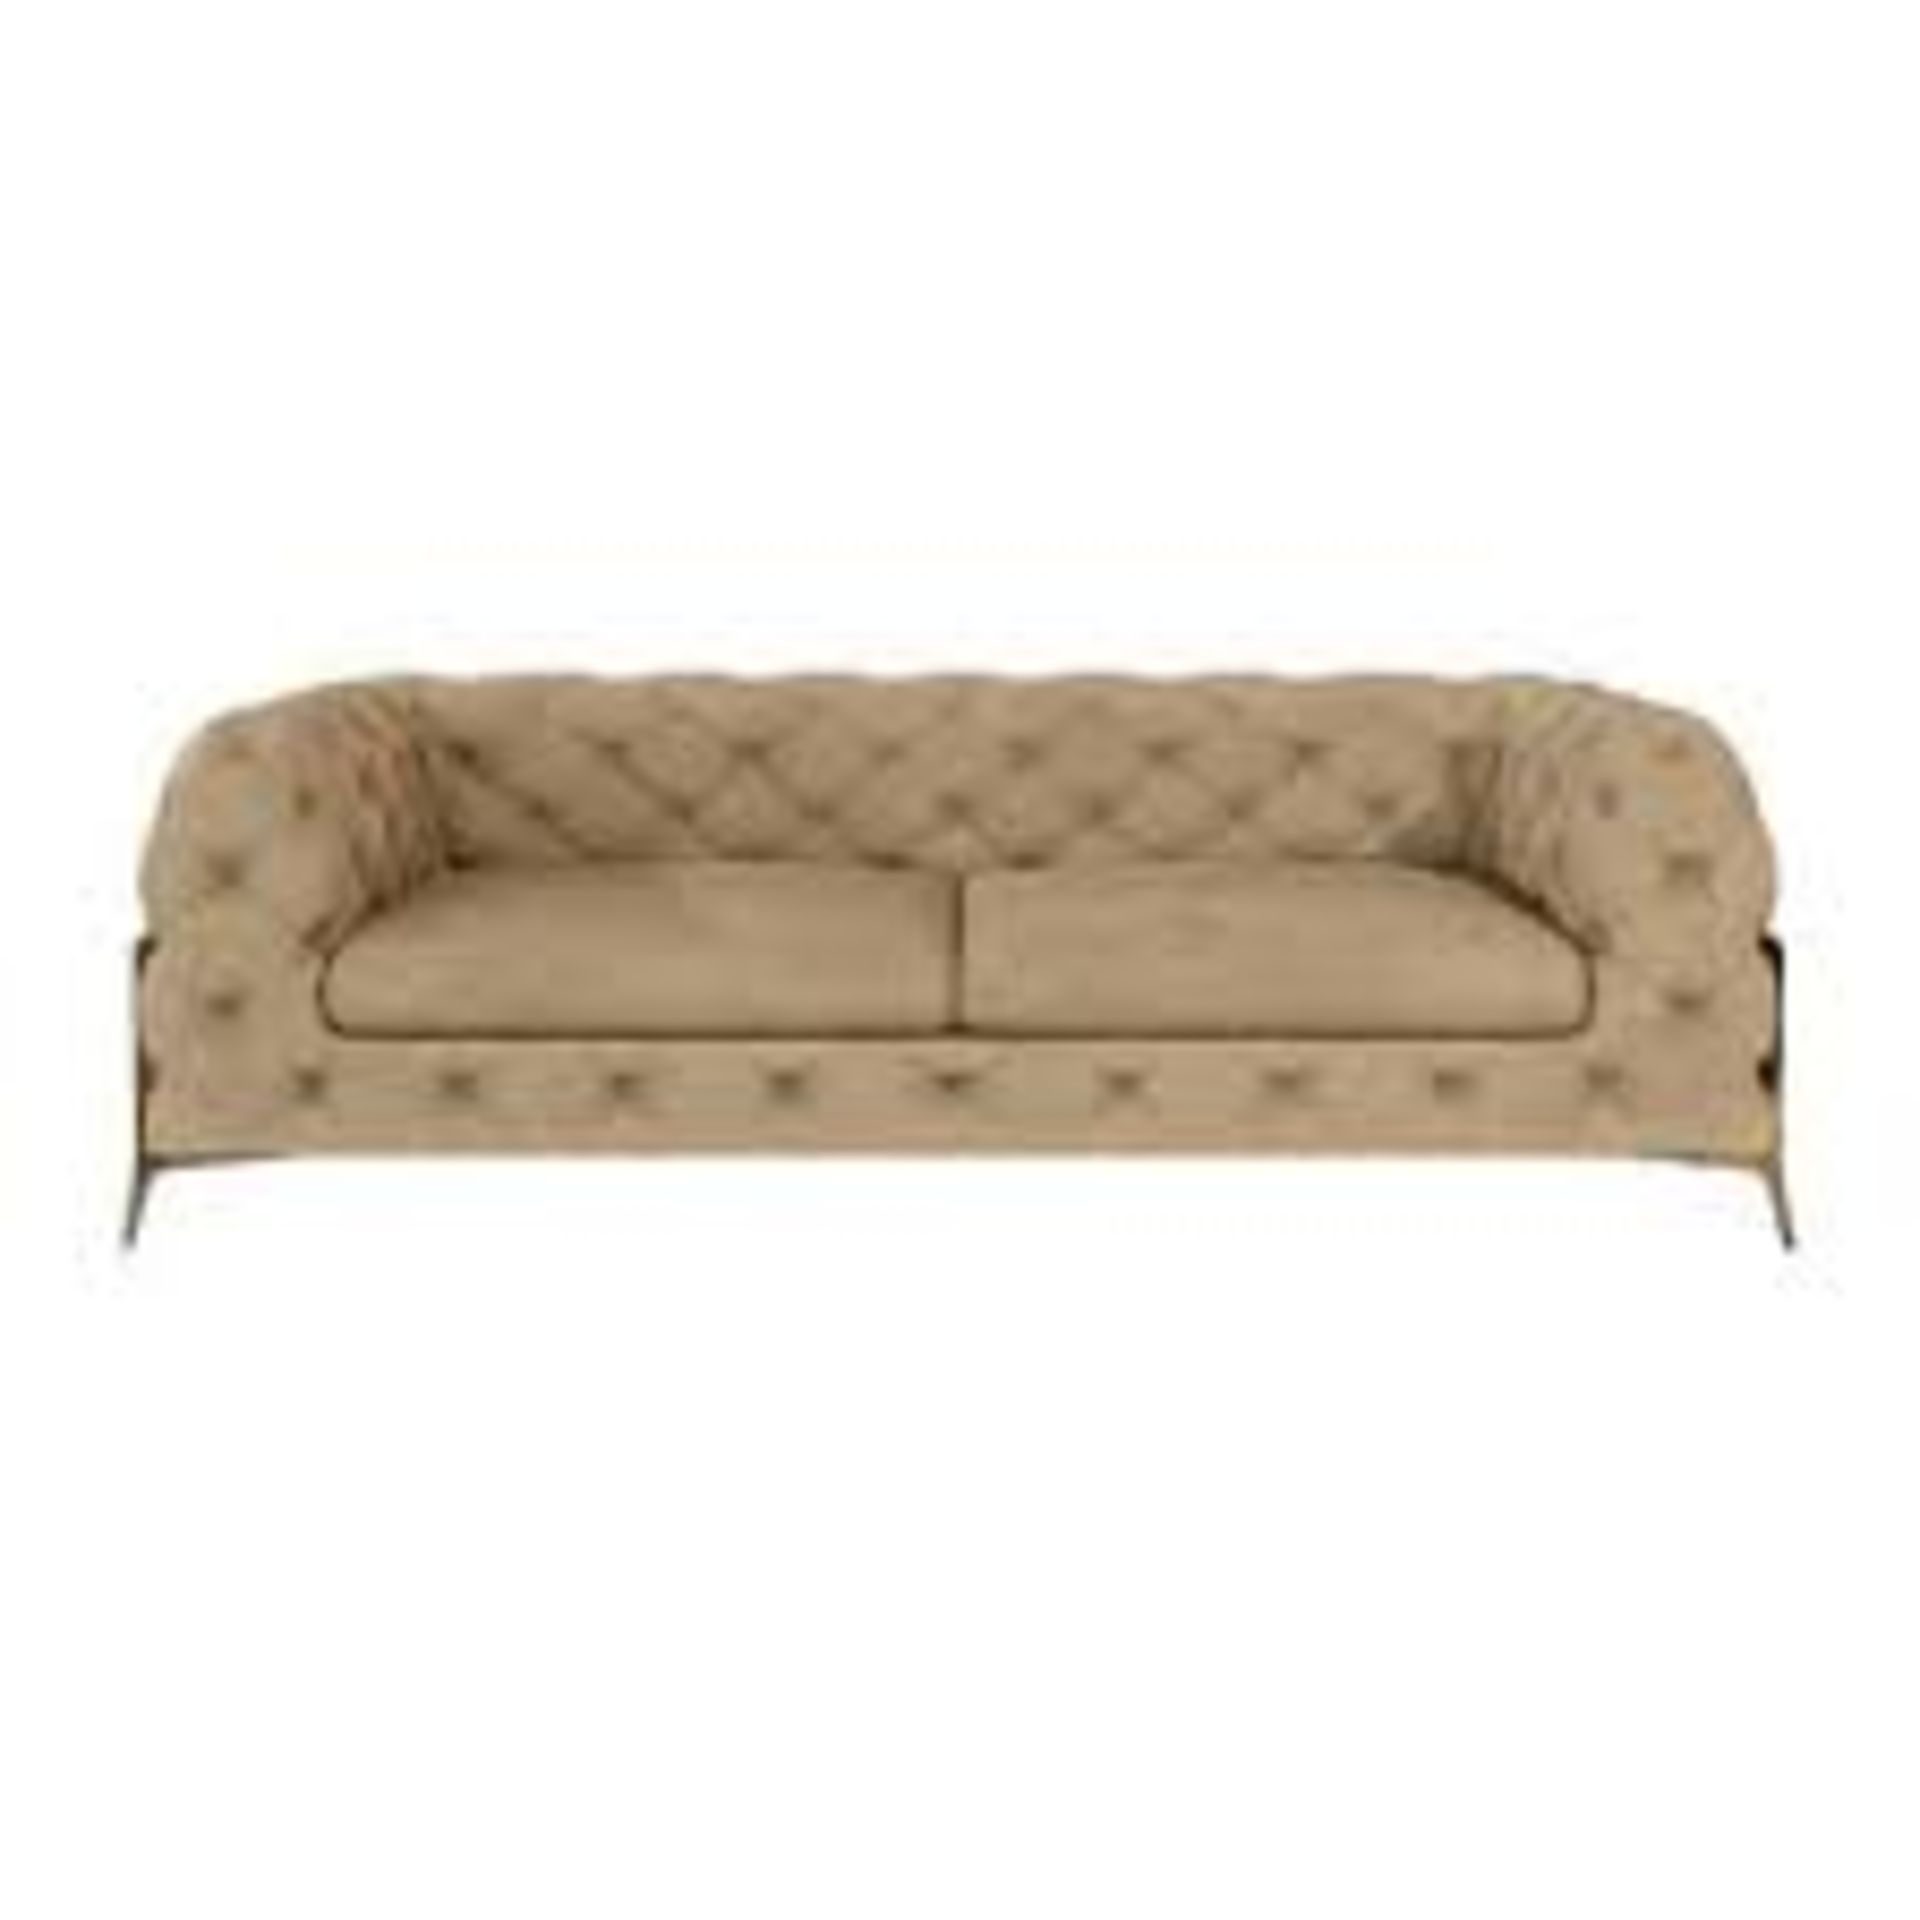 Mercer41 Krumm 2 Seater Upholstered Sofa. RRP £1,099.00. This sofa has a traditional yet modern